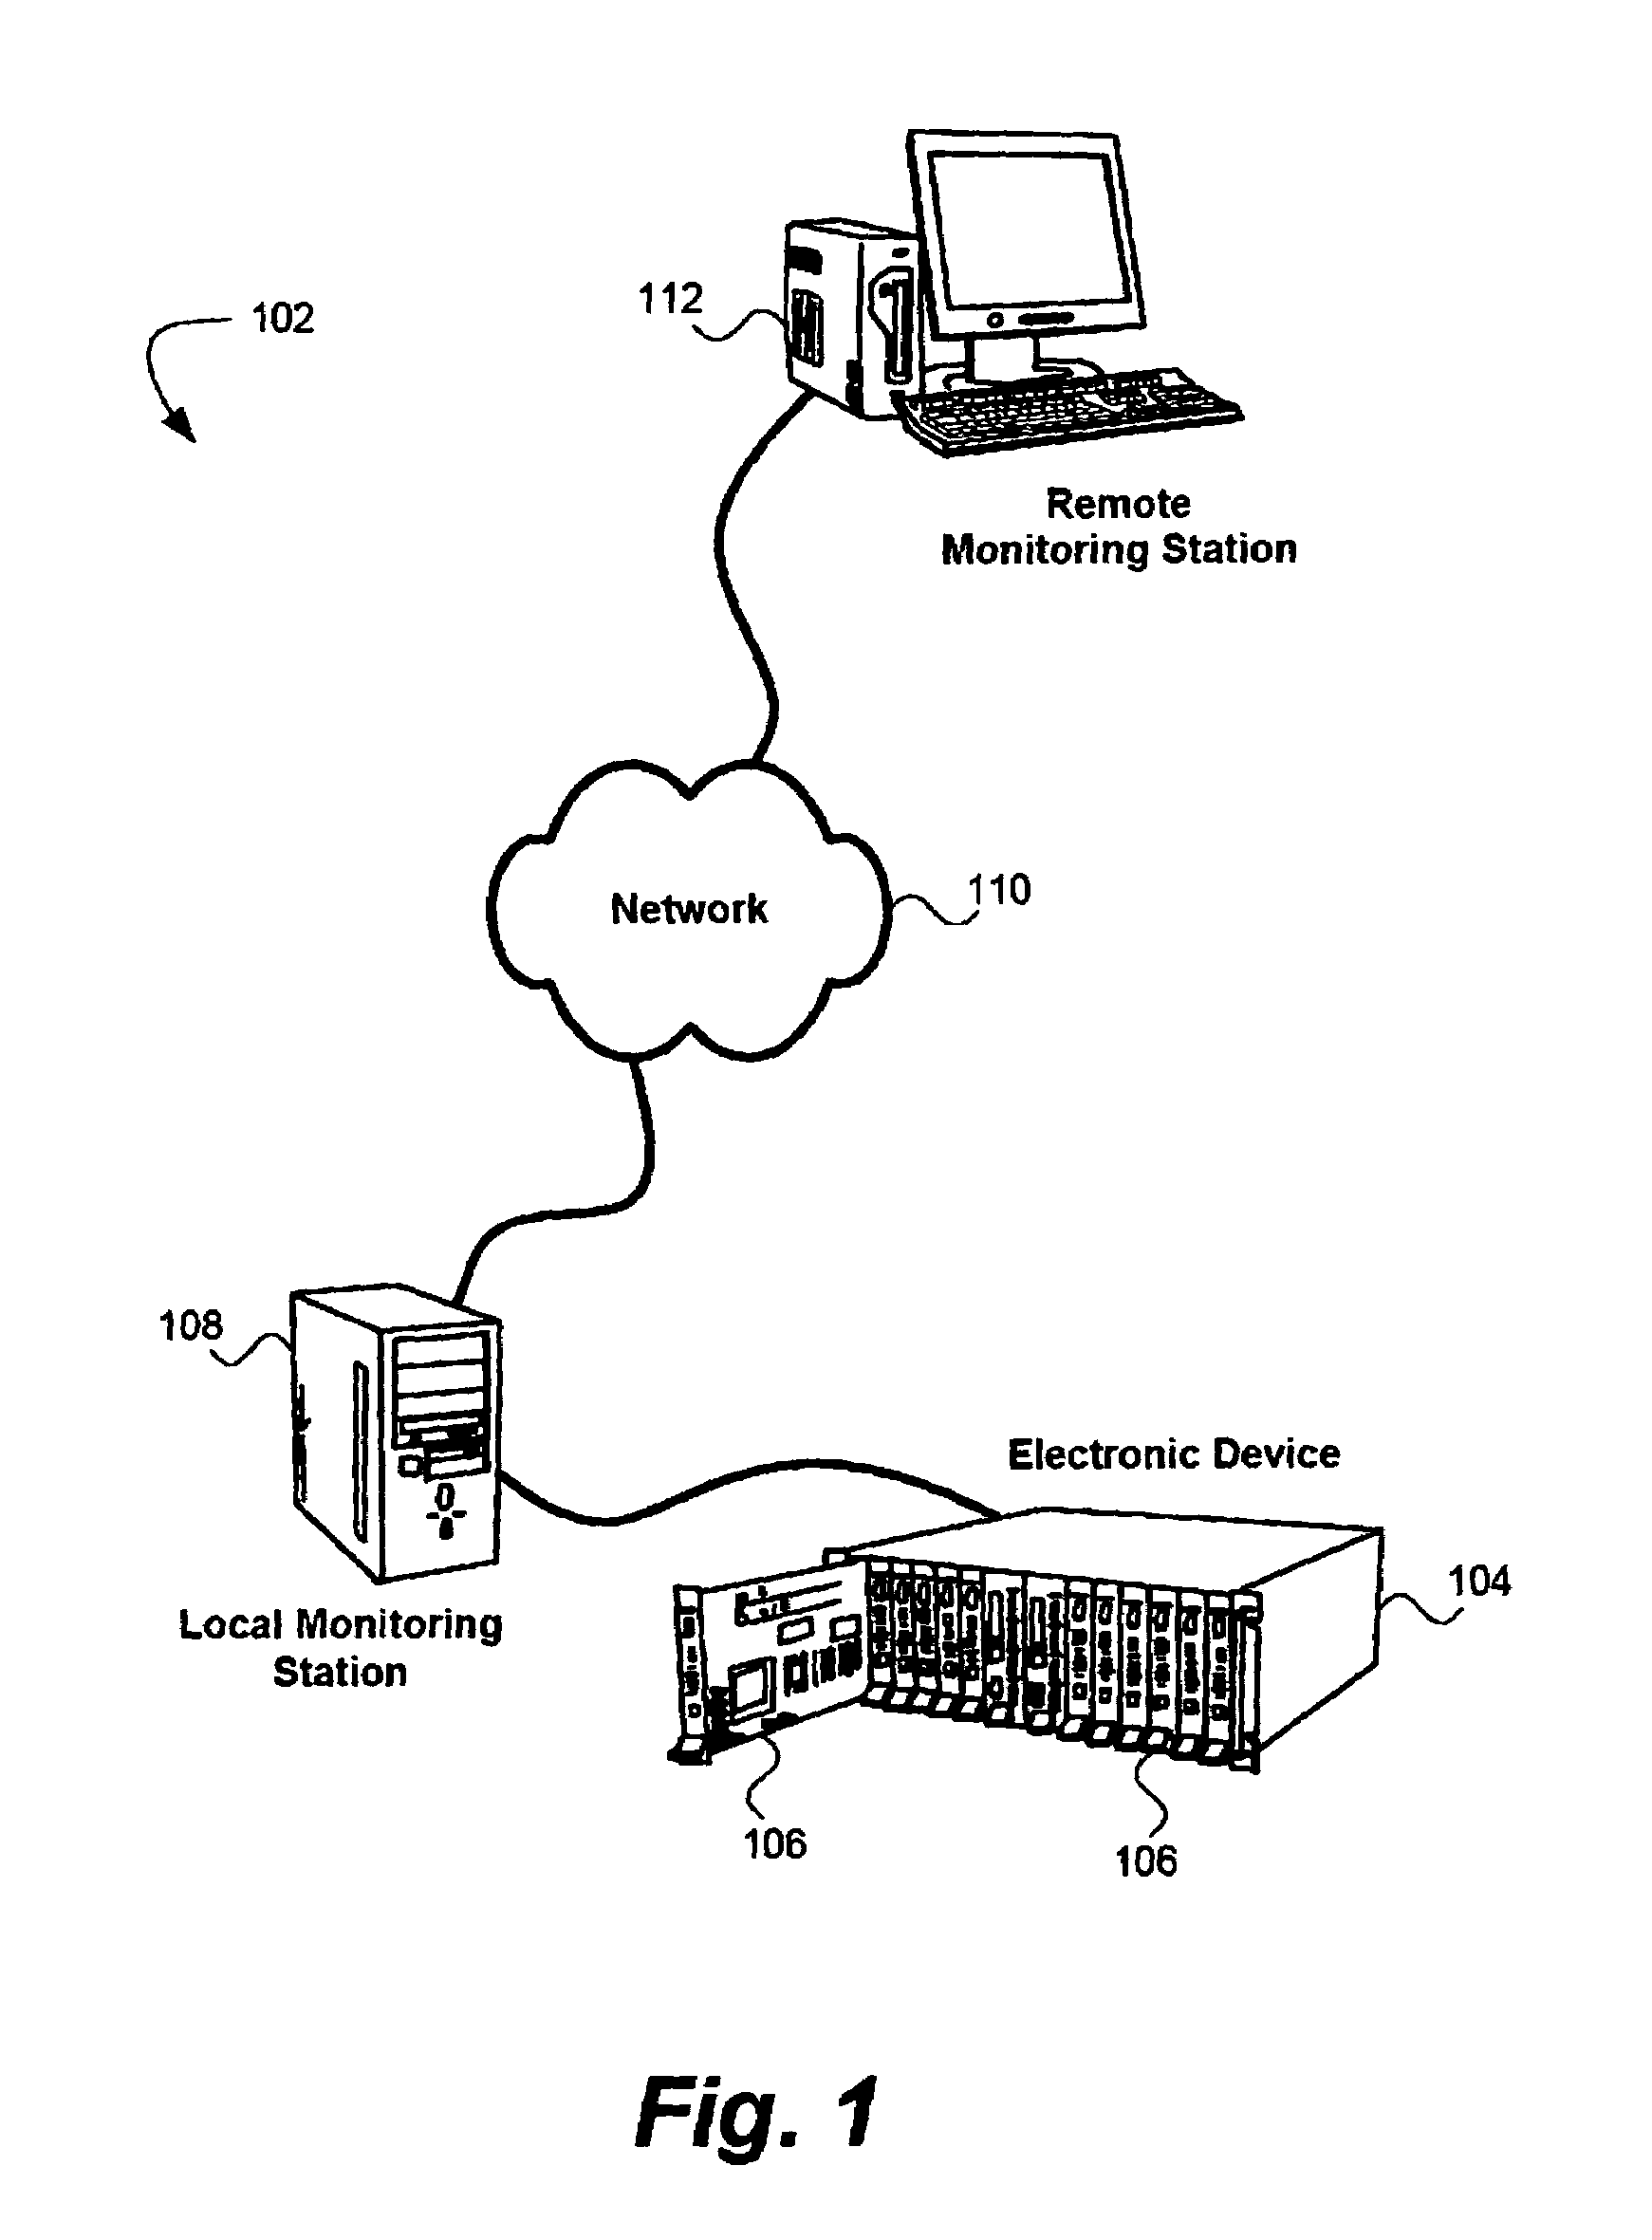 Predictive failure analysis and failure isolation using current sensing